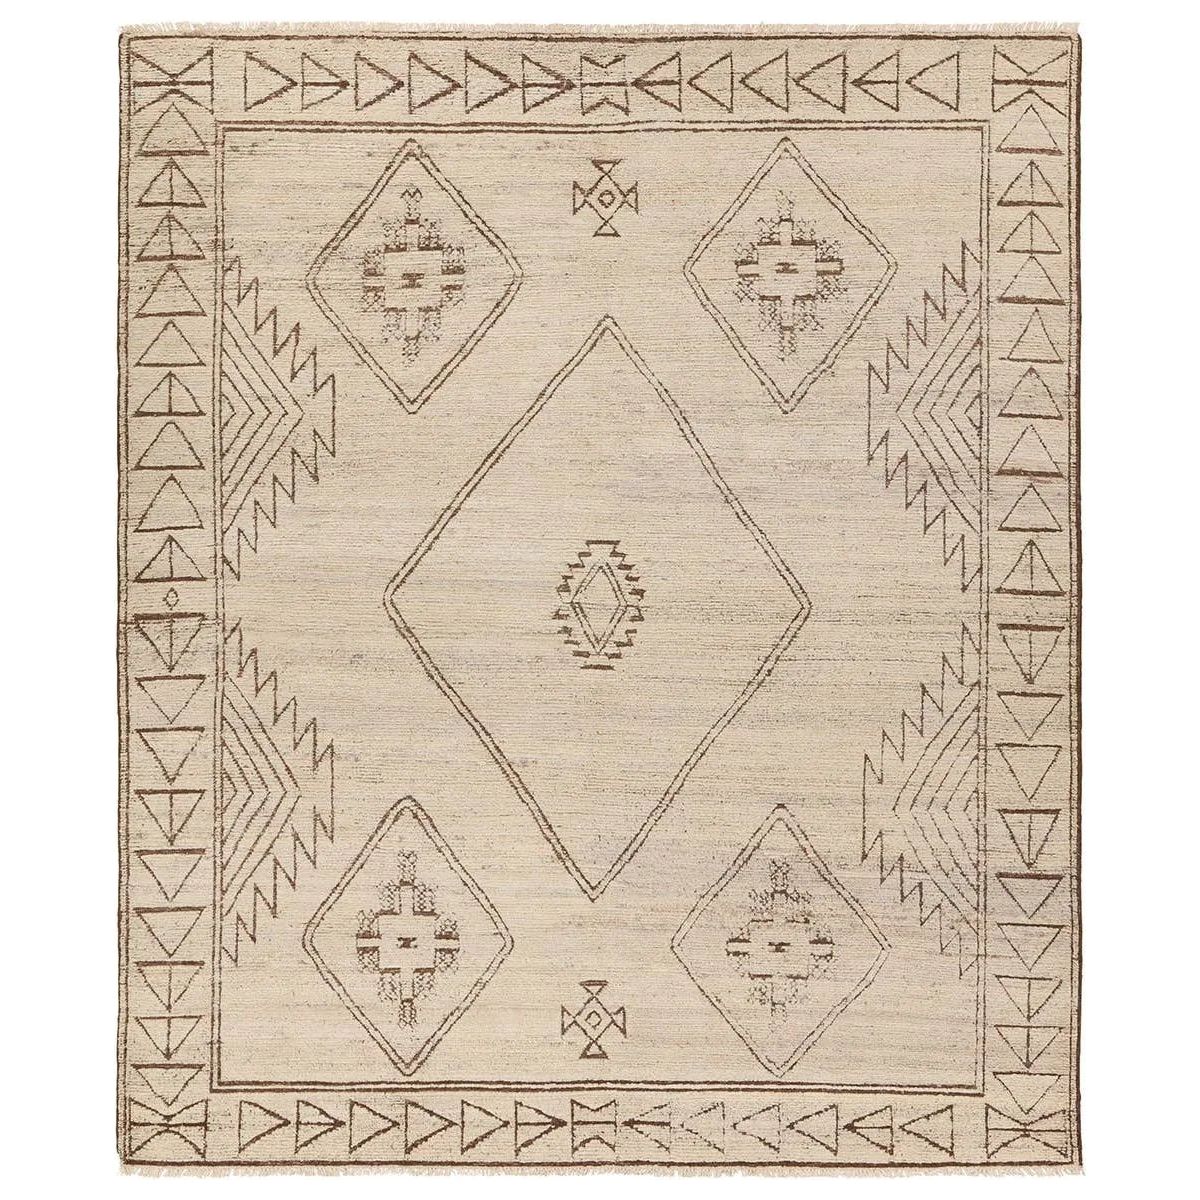 Envelop living spaces in the rich heritage of tribal artistry with the Zayda by Heja Home Elvendria. These handknotted rugs, expertly crafted in India using 100% wool, exude a mesmerizing blend of tribal charm and timeless geometric elegance. The Elvendria design features an open medallion design in a tan and taupe colorway. Amethyst Home provides interior design, new home construction design consulting, vintage area rugs, and lighting in the Houston metro area.